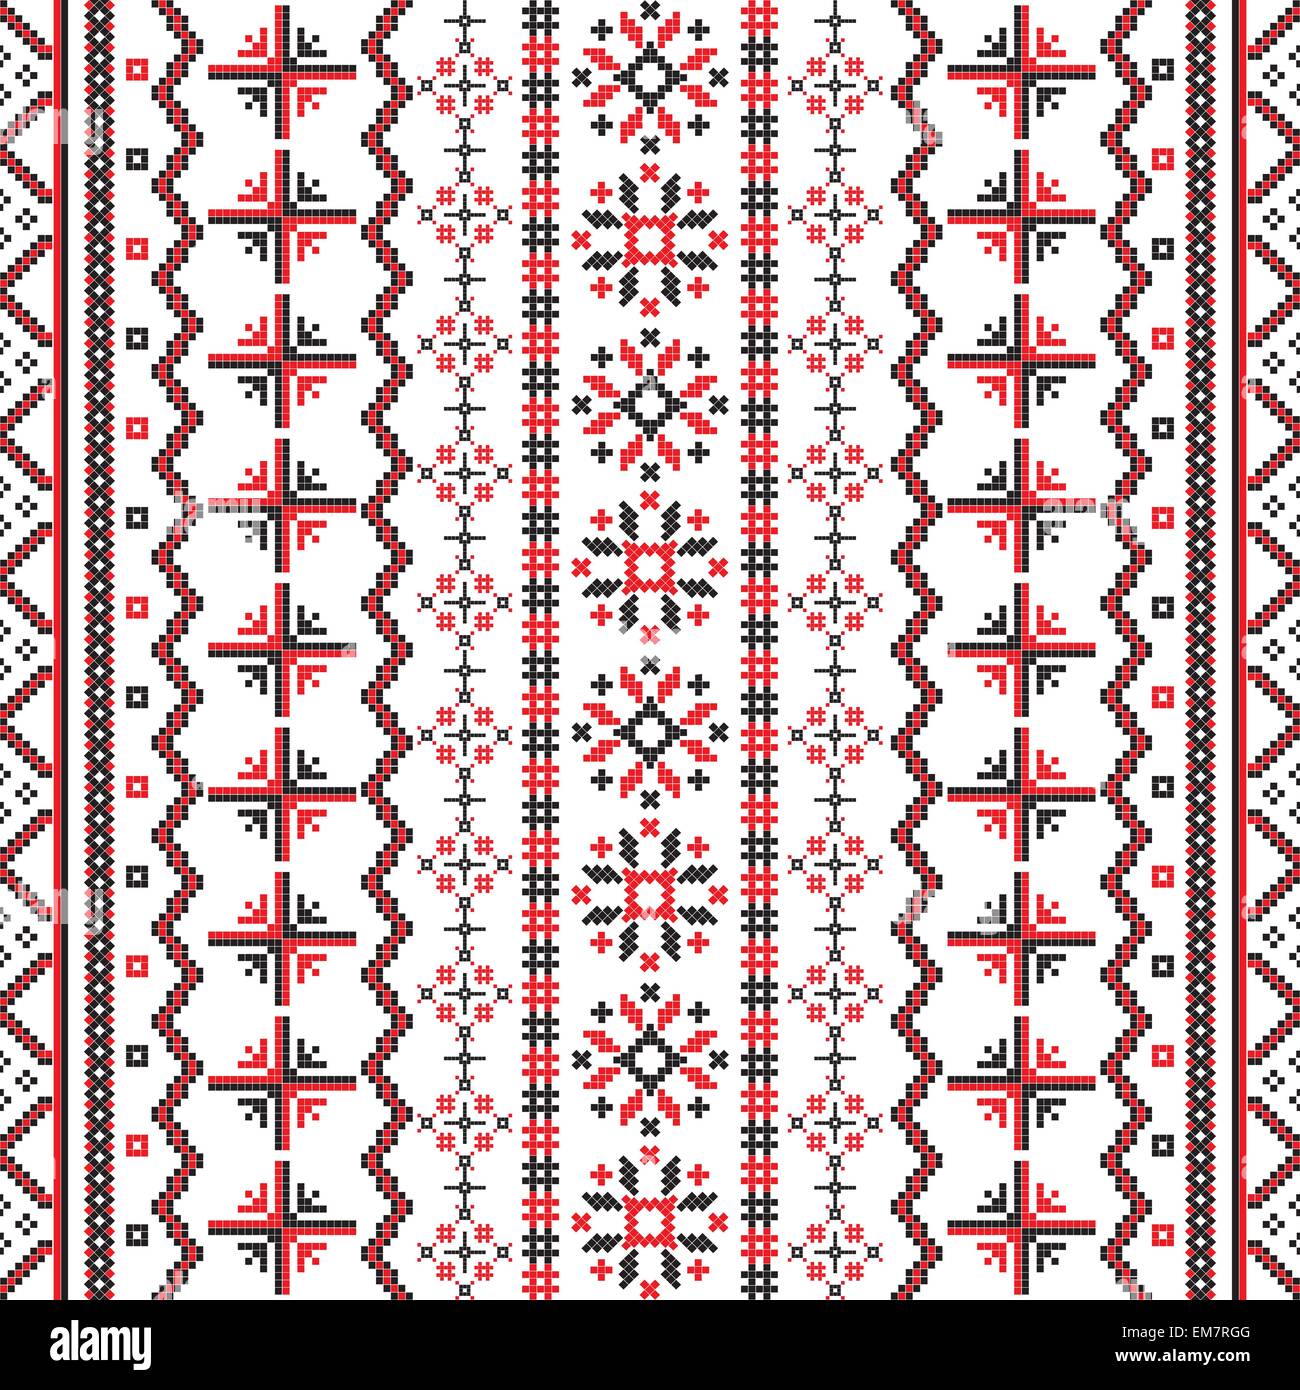 Romanian Embroideries pattern Stock Vector